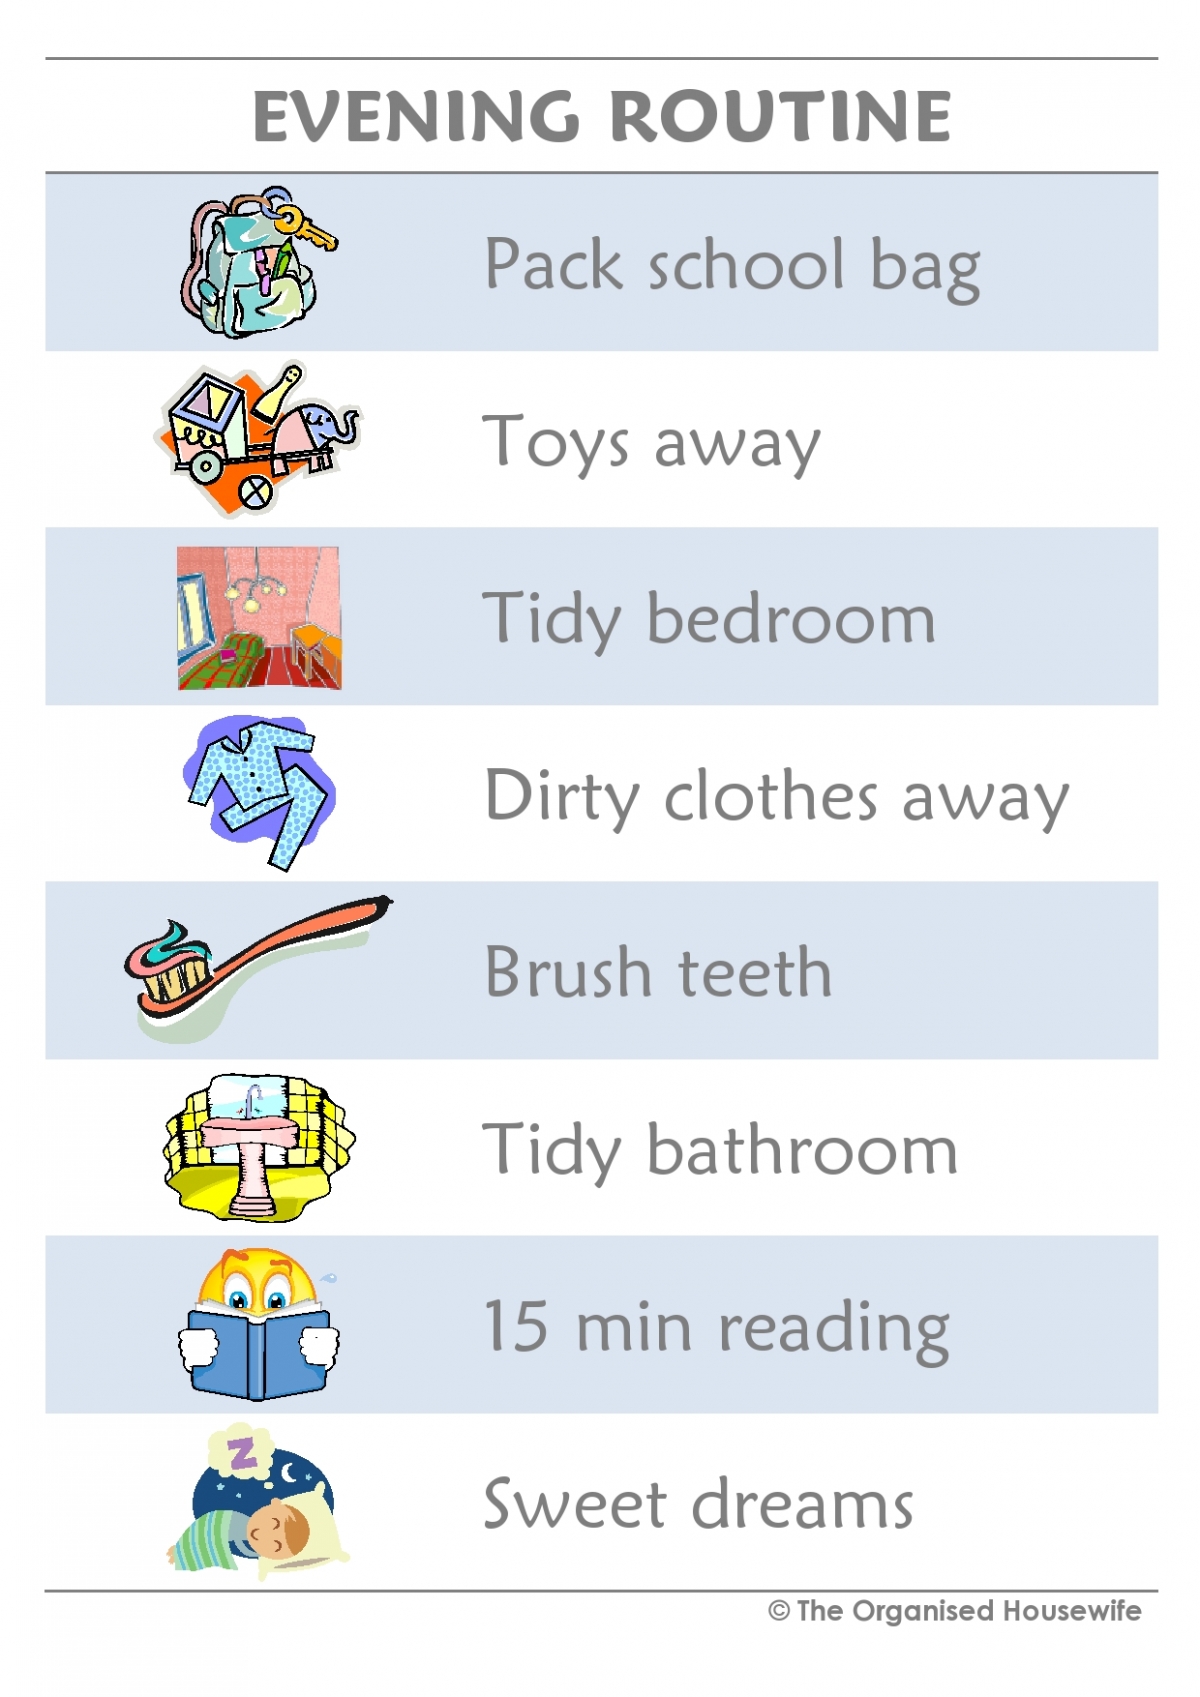 Blank Bedtime Routine Chart